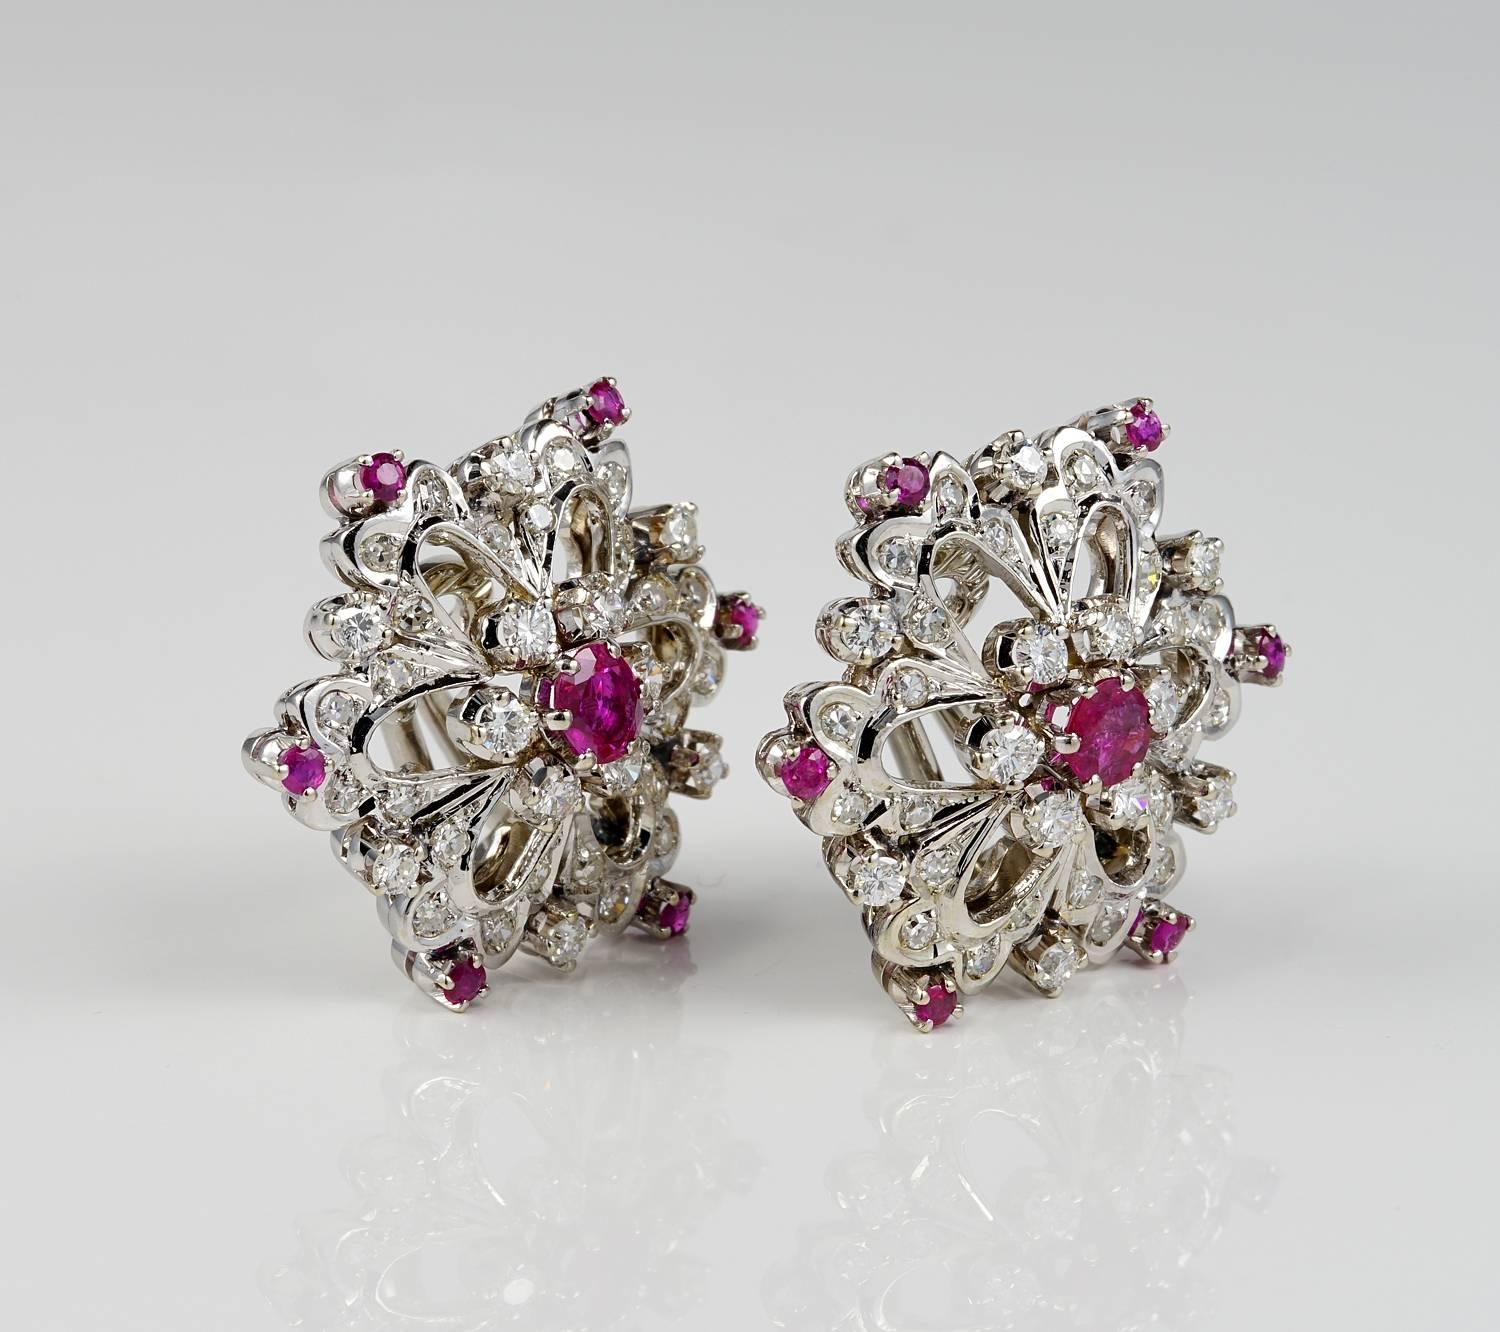 Reduced!

A one off pair of 1950 vintage earrings skilfull hand crafted as unique flower with exceptional pierced work and rare design
Italian origin, made of solid 18 Kt white gold
Set throughout with 1.95 Ct of bright white quality Diamonds rated